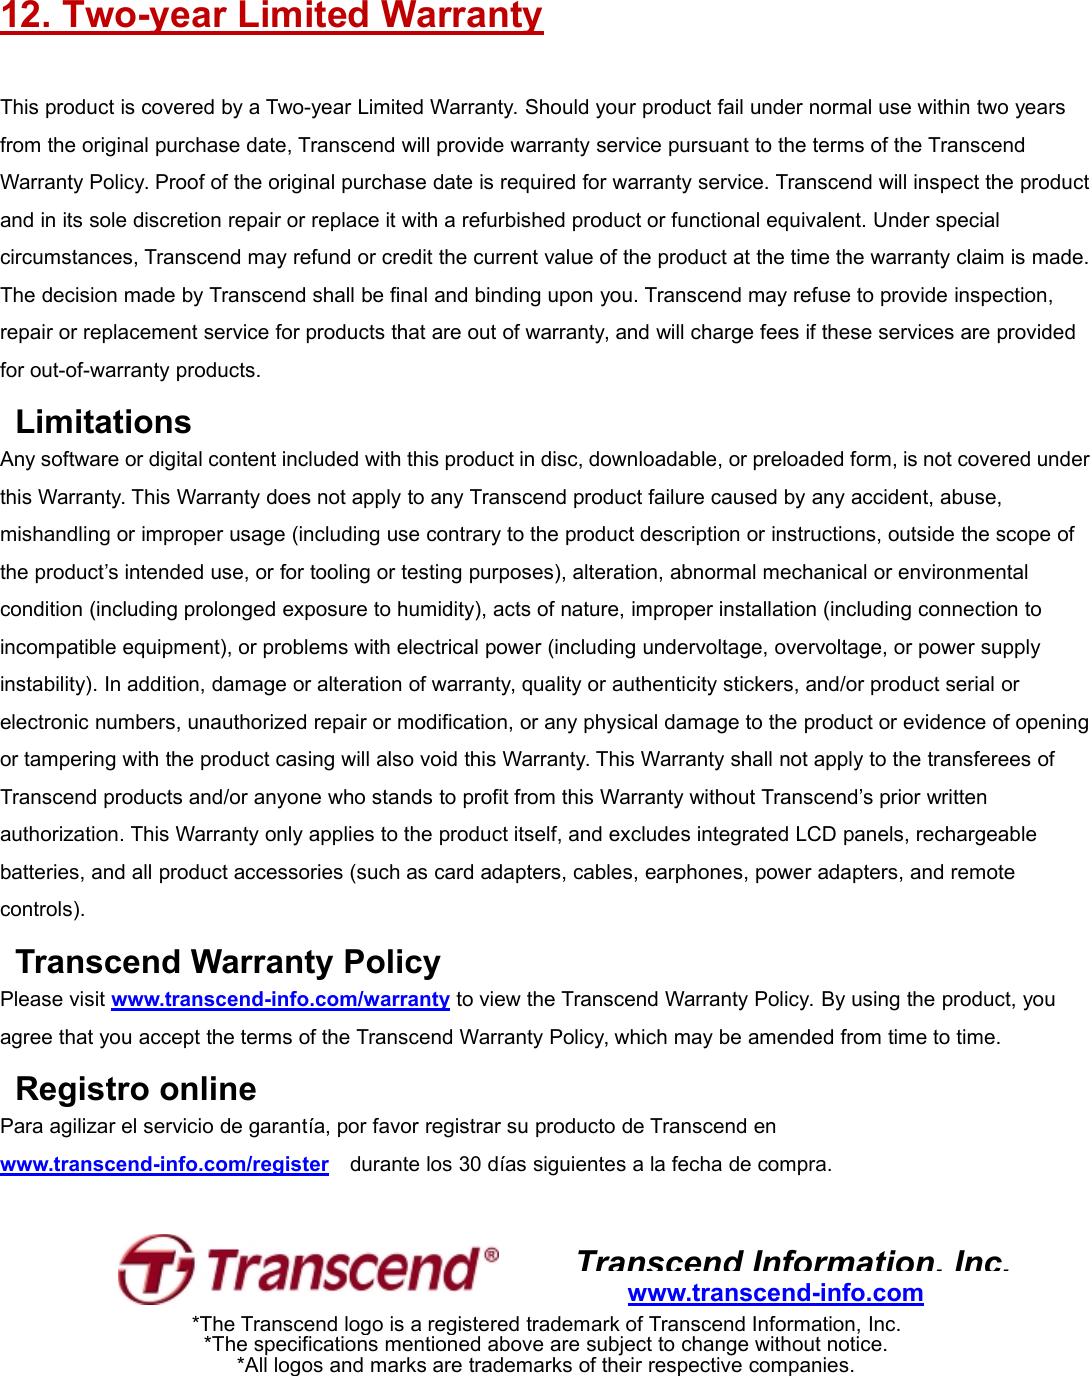 12. Two-year Limited WarrantyThis product is covered by a Two-year Limited Warranty. Should your product fail under normal use within two yearsfrom the original purchase date, Transcend will provide warranty service pursuant to the terms of the TranscendWarranty Policy. Proof of the original purchase date is required for warranty service. Transcend will inspect the productand in its sole discretion repair or replace it with a refurbished product or functional equivalent. Under specialcircumstances, Transcend may refund or credit the current value of the product at the time the warranty claim is made.The decision made by Transcend shall be final and binding upon you. Transcend may refuse to provide inspection,repair or replacement service for products that are out of warranty, and will charge fees if these services are providedfor out-of-warranty products.LimitationsAny software or digital content included with this product in disc, downloadable, or preloaded form, is not covered underthis Warranty. This Warranty does not apply to any Transcend product failure caused by any accident, abuse,mishandling or improper usage (including use contrary to the product description or instructions, outside the scope ofthe product’s intended use, or for tooling or testing purposes), alteration, abnormal mechanical or environmentalcondition (including prolonged exposure to humidity), acts of nature, improper installation (including connection toincompatible equipment), or problems with electrical power (including undervoltage, overvoltage, or power supplyinstability). In addition, damage or alteration of warranty, quality or authenticity stickers, and/or product serial orelectronic numbers, unauthorized repair or modification, or any physical damage to the product or evidence of openingor tampering with the product casing will also void this Warranty. This Warranty shall not apply to the transferees ofTranscend products and/or anyone who stands to profit from this Warranty without Transcend’s prior writtenauthorization. This Warranty only applies to the product itself, and excludes integrated LCD panels, rechargeablebatteries, and all product accessories (such as card adapters, cables, earphones, power adapters, and remotecontrols).Transcend Warranty PolicyPlease visit www.transcend-info.com/warranty to view the Transcend Warranty Policy. By using the product, youagree that you accept the terms of the Transcend Warranty Policy, which may be amended from time to time.Registro onlinePara agilizar el servicio de garantía, por favor registrar su producto de Transcend enwww.transcend-info.com/register durante los 30 días siguientes a la fecha de compra.Transcend Information, Inc.www.transcend-info.com*The Transcend logo is a registered trademark of Transcend Information, Inc.*The specifications mentioned above are subject to change without notice.*All logos and marks are trademarks of their respective companies.